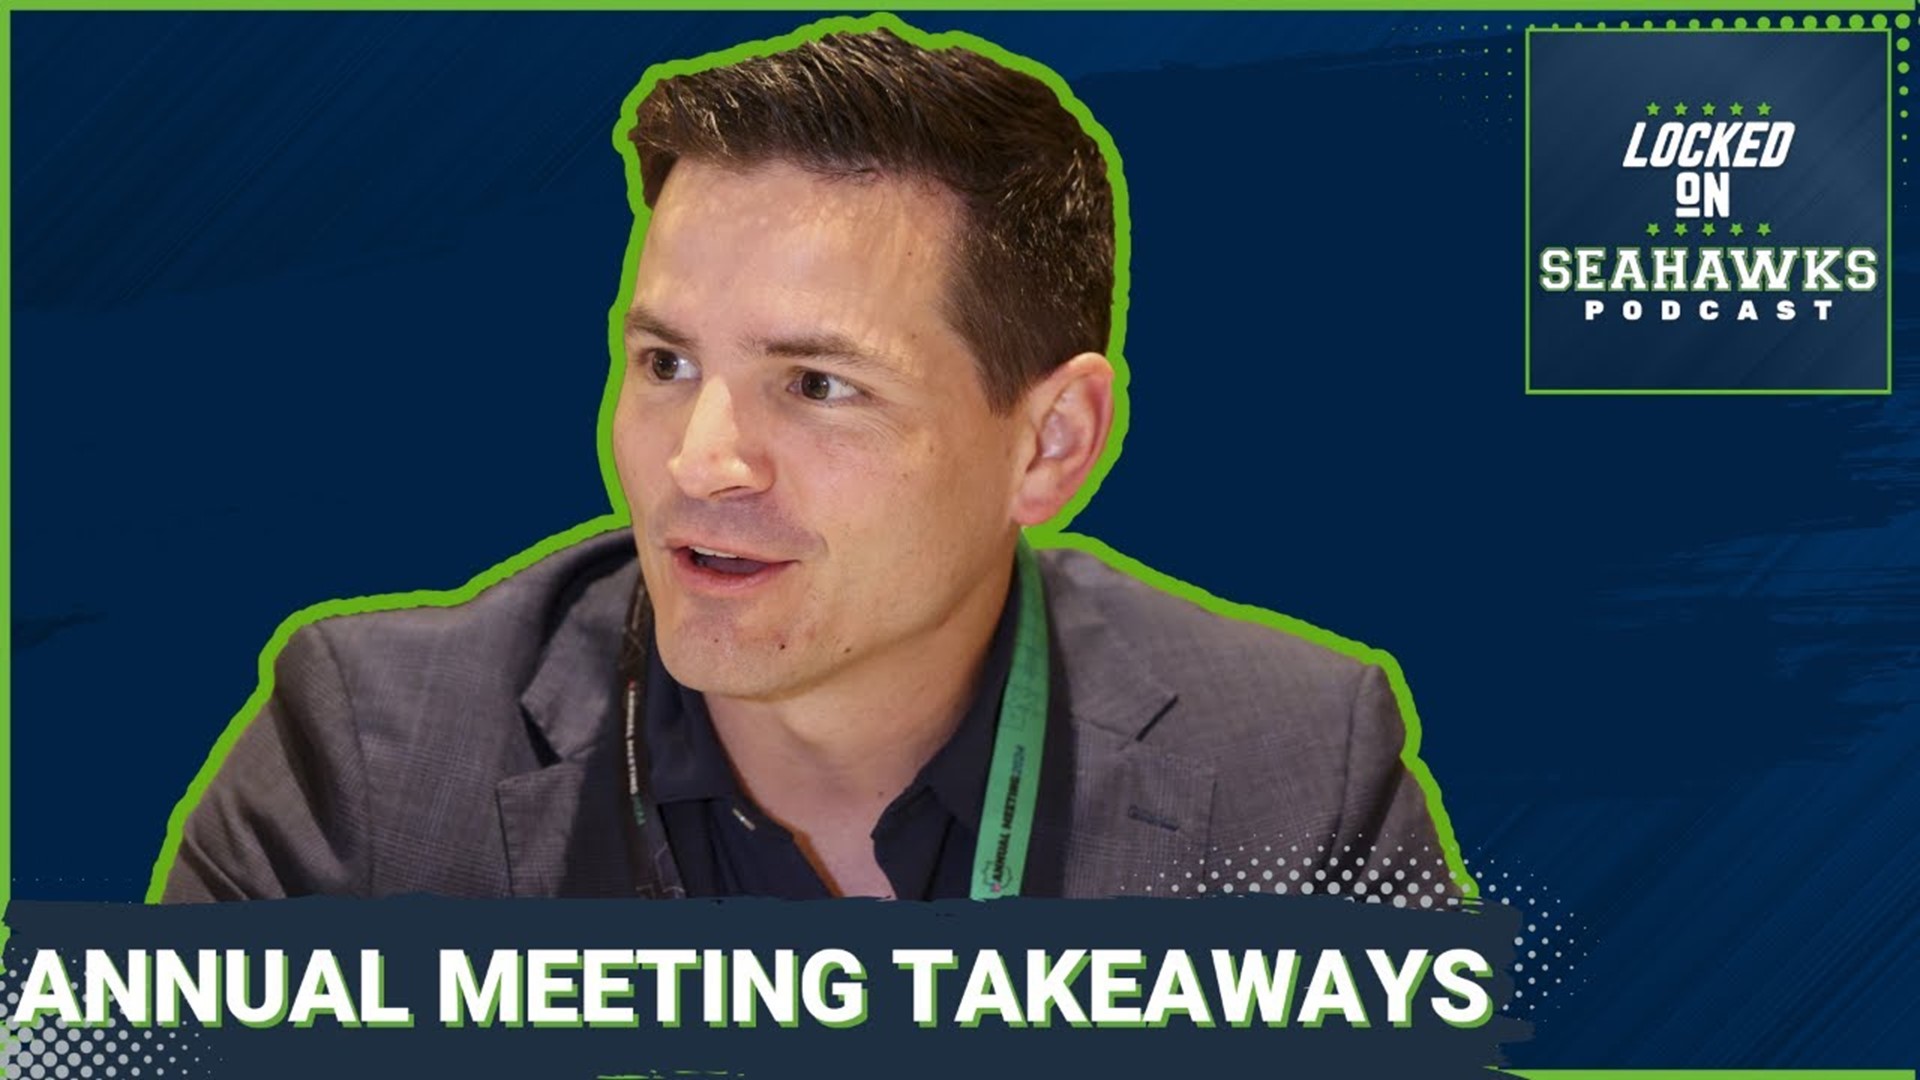 Touching on a variety of topics such as free agent scheme fits, the Sam Howell trade, and the NFL's new hip drop tackle rule, Seahawks coach Mike Macdonald speaks